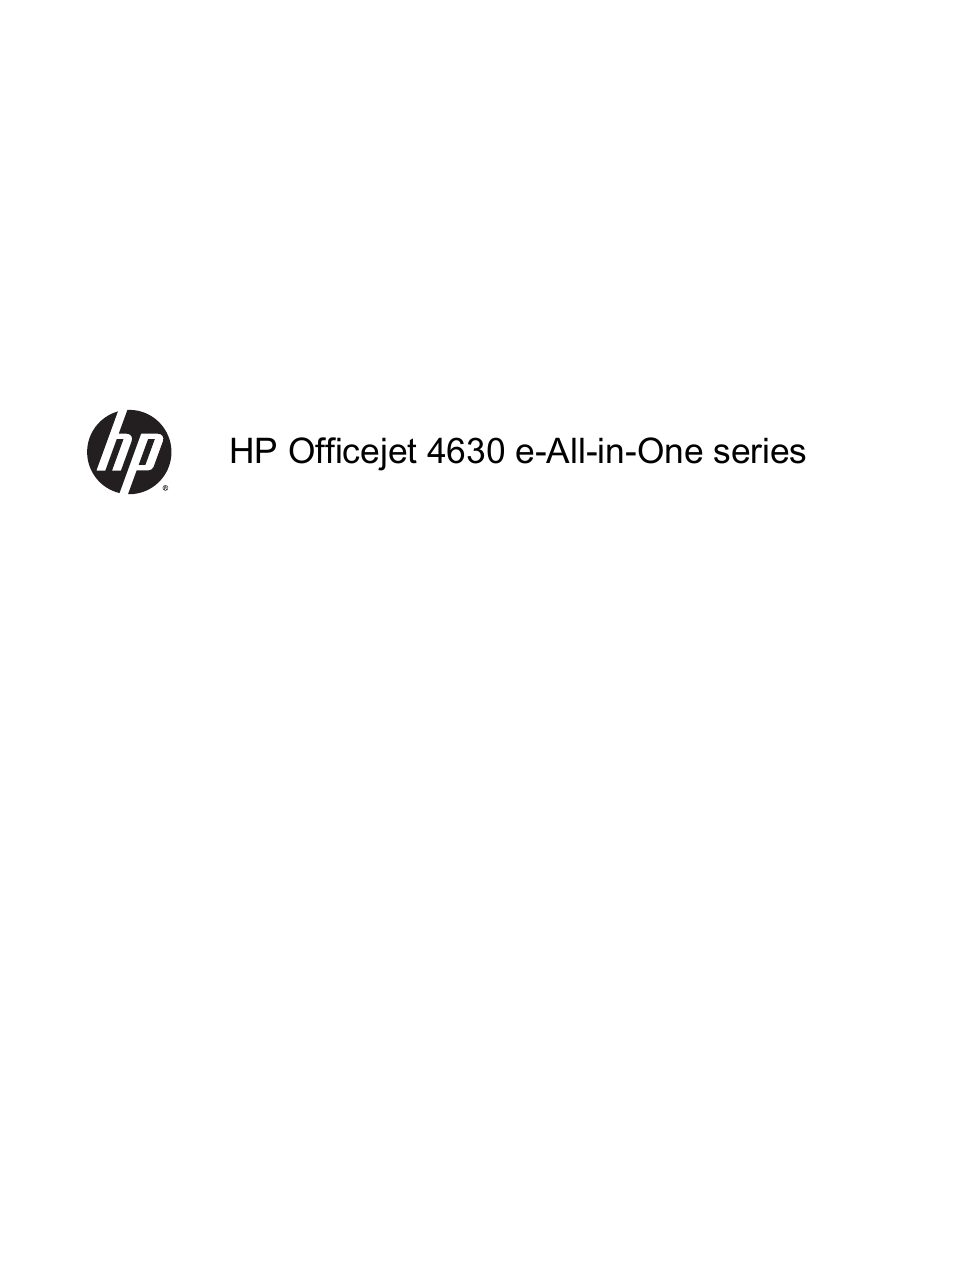 HP Officejet 4630 e-All-in-One Printer User Manual | 166 pages